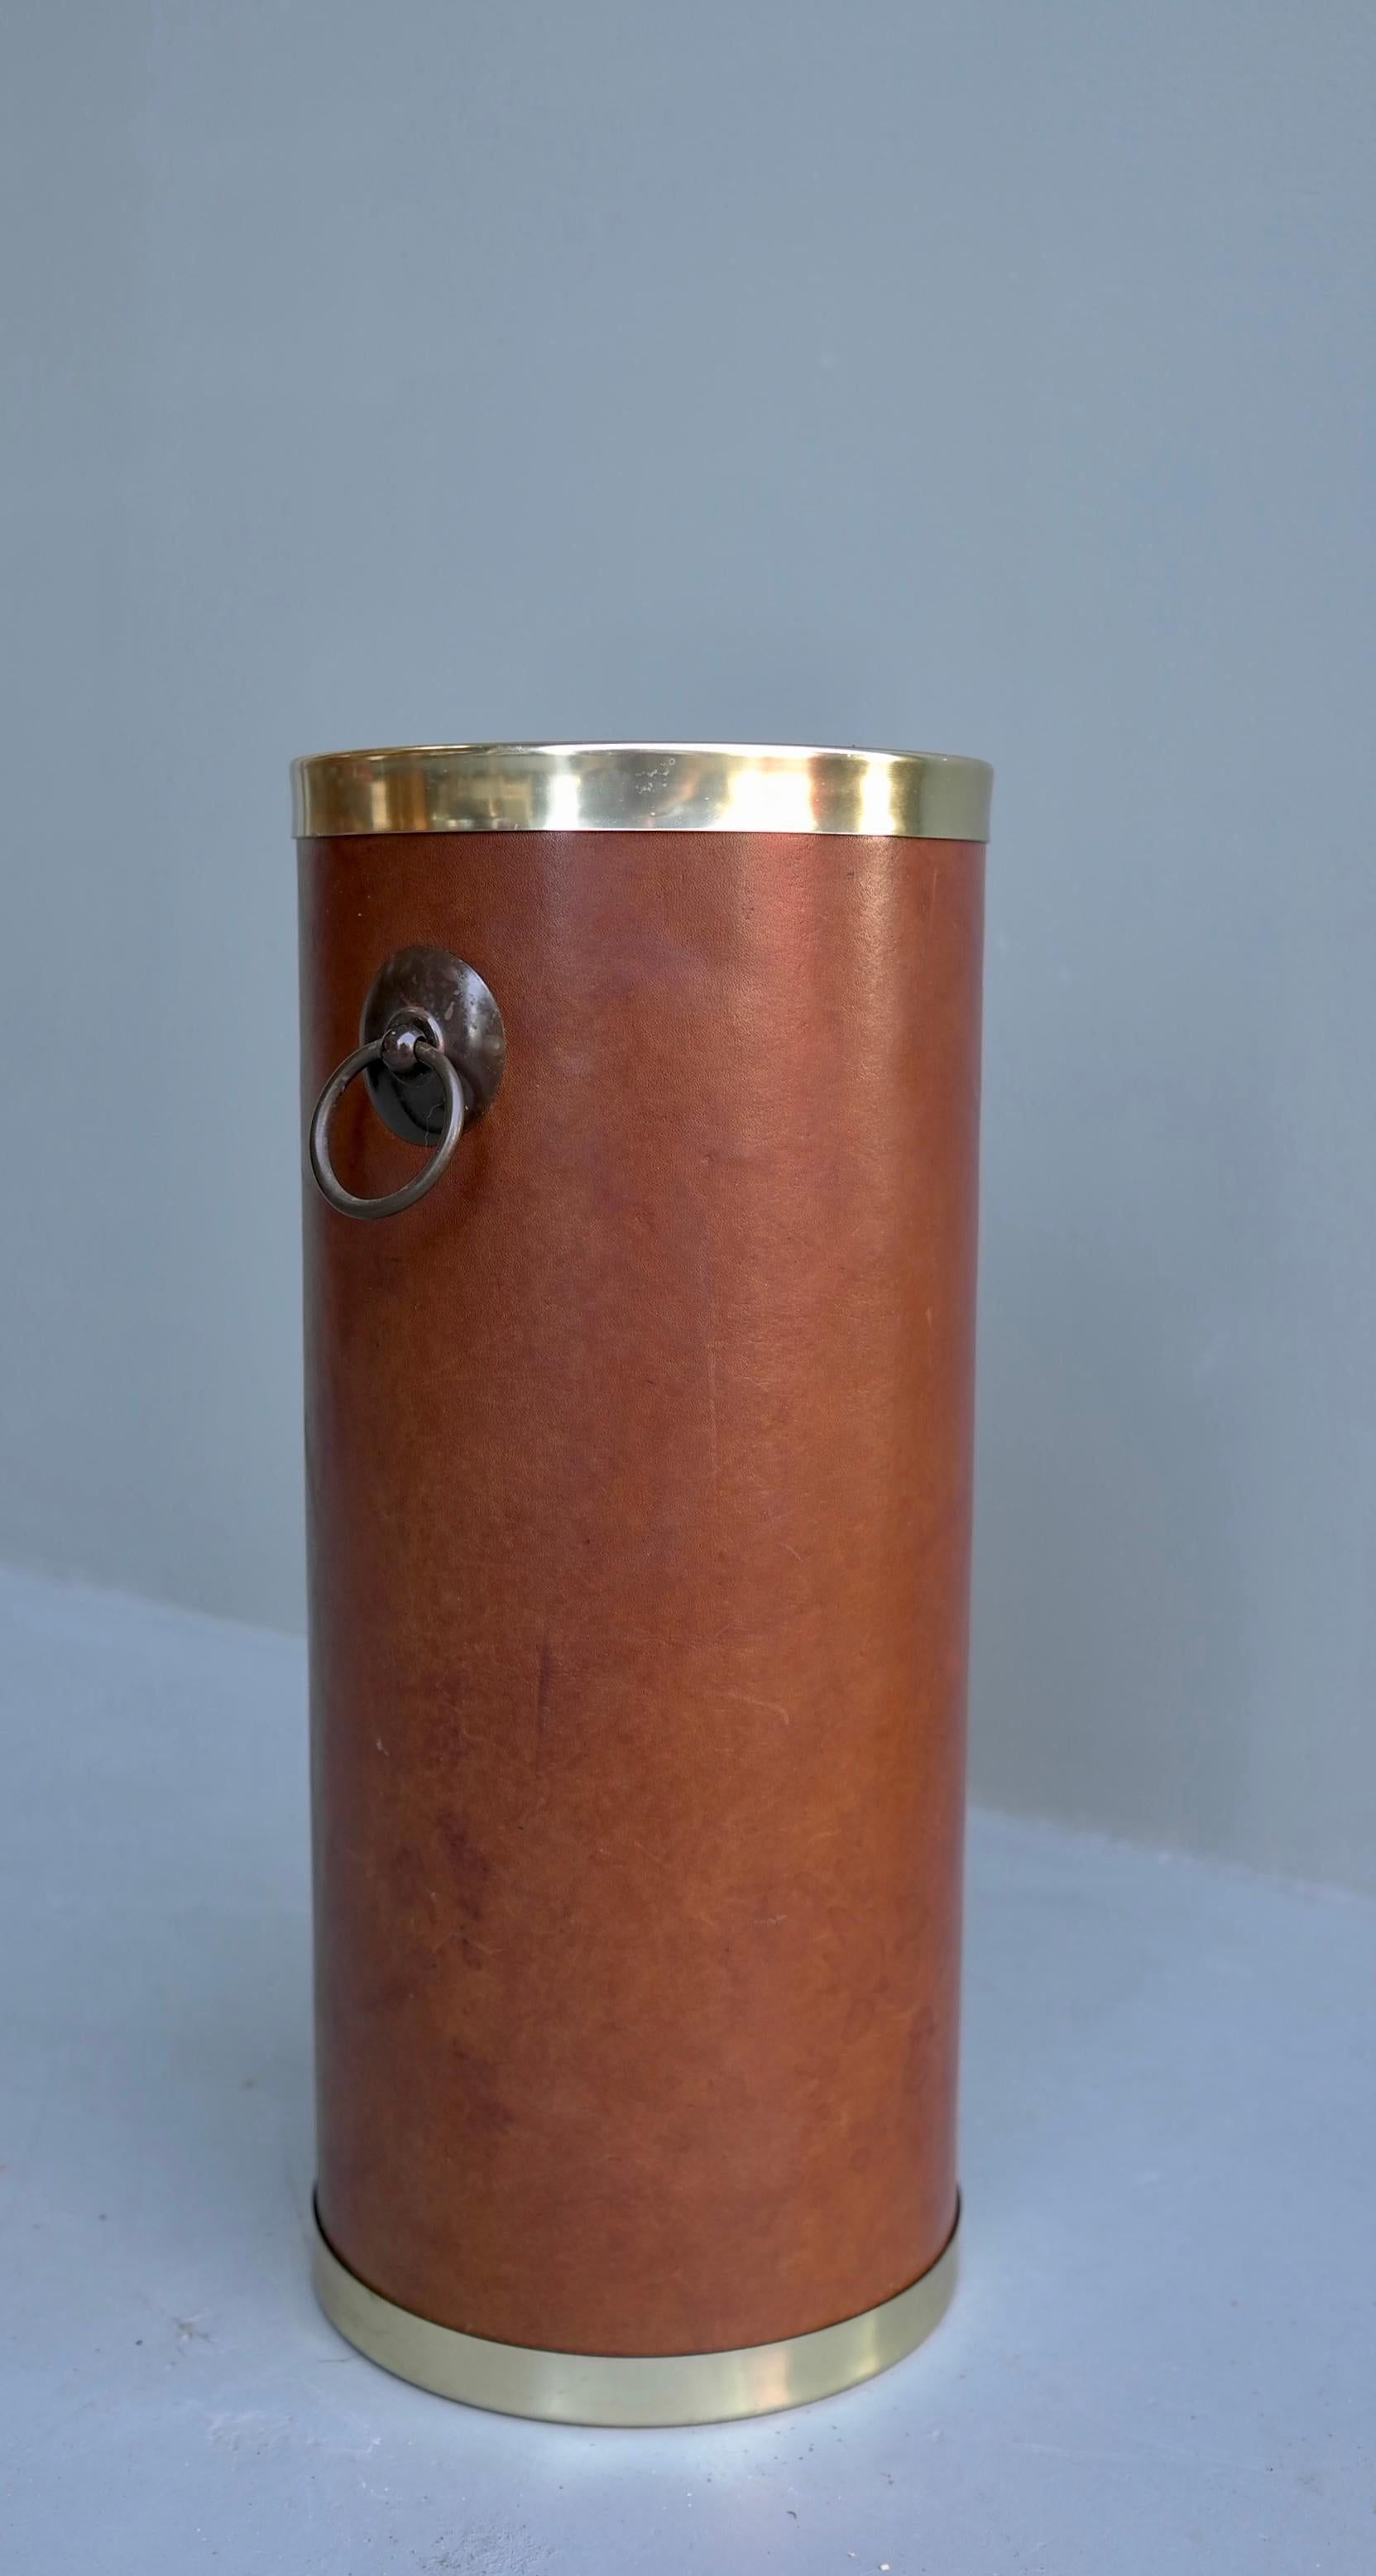 Cognac Mid-Century Modern Leather and Brass Umbrella Stand, France, 1960s For Sale 1